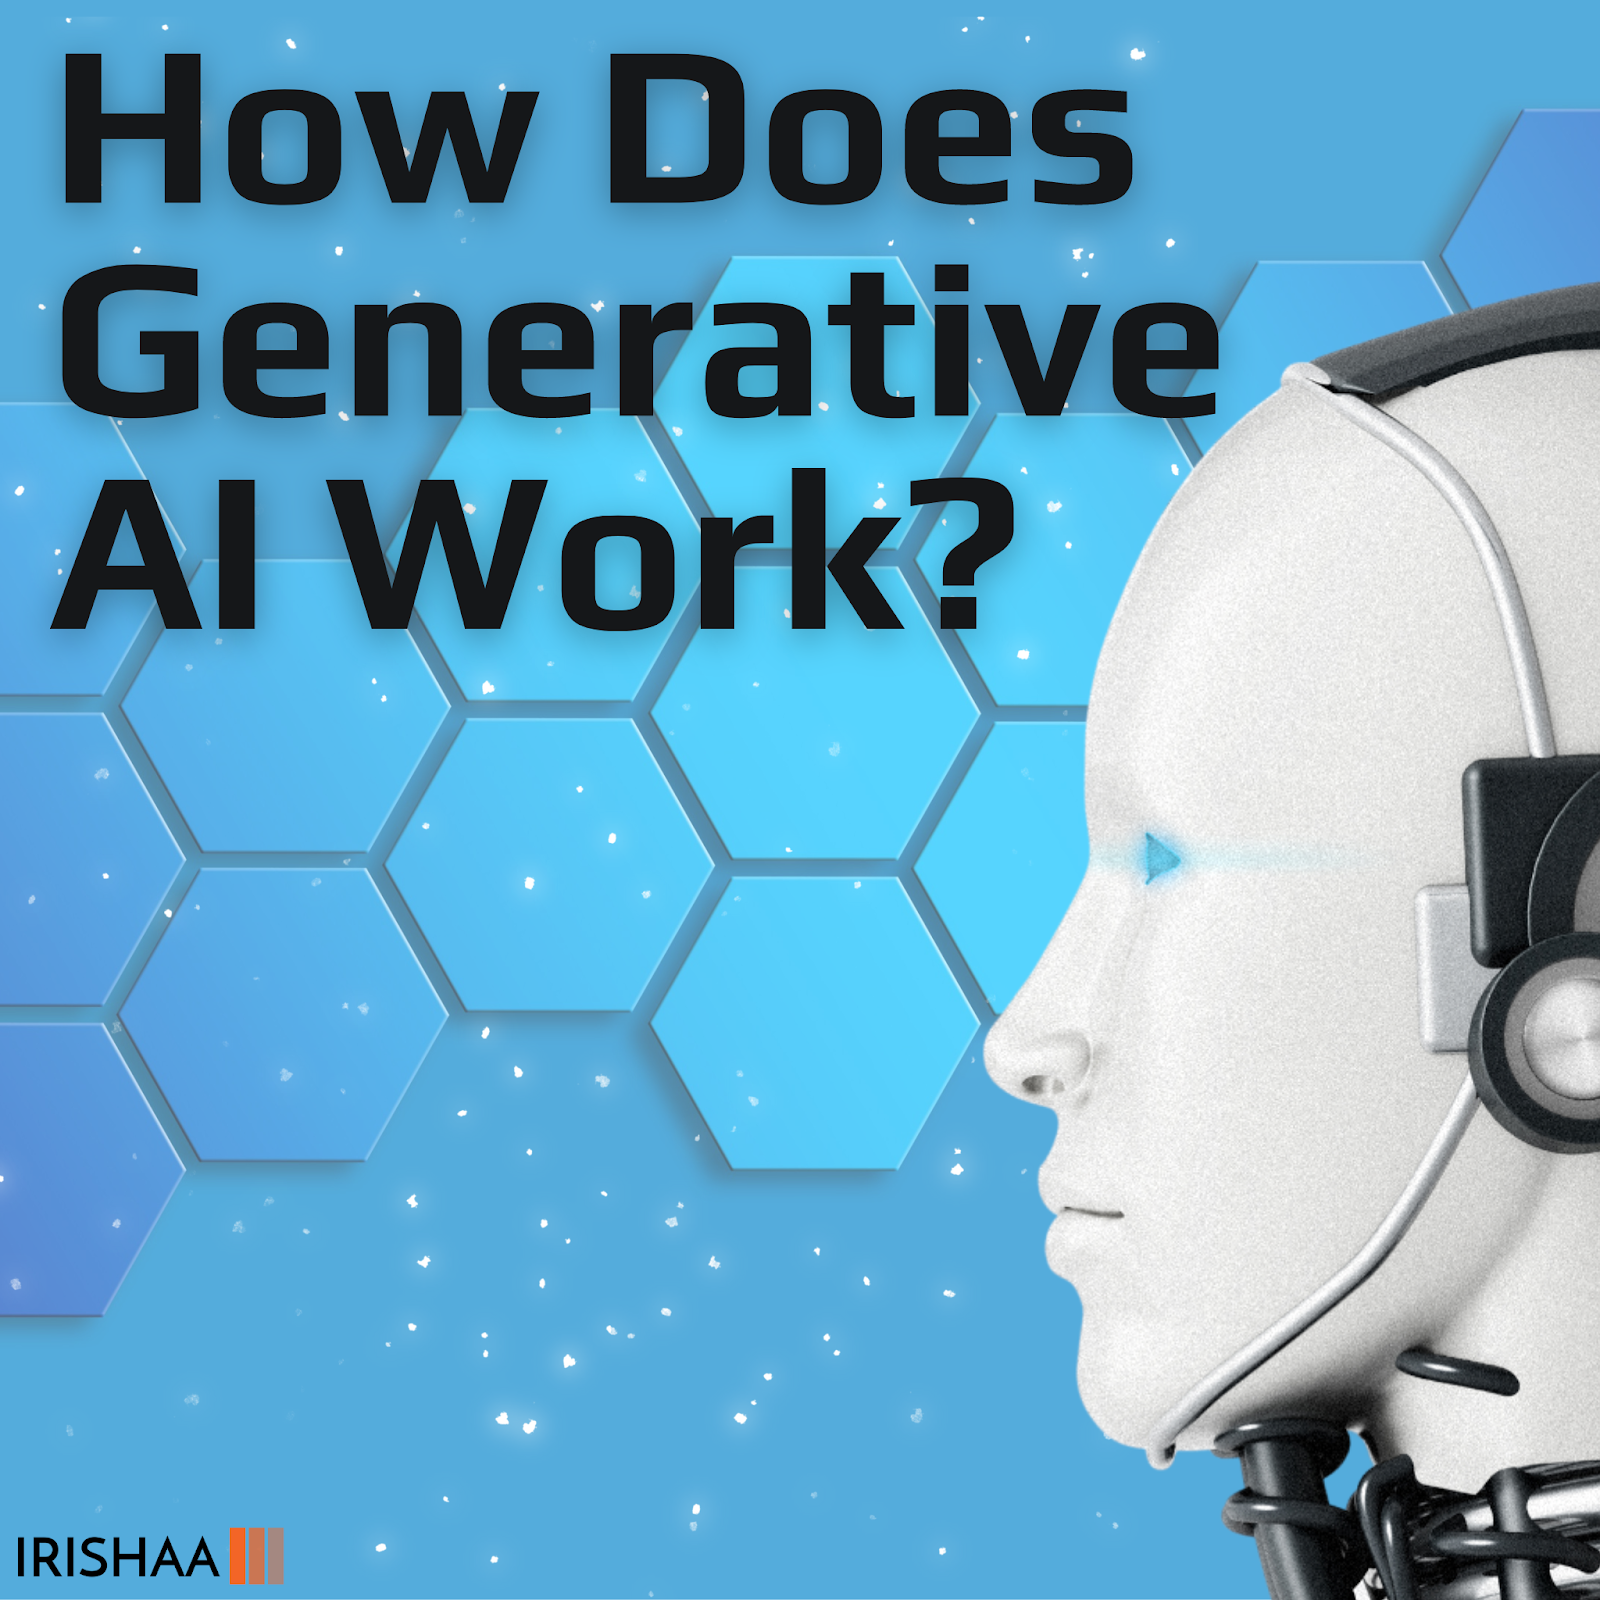  How Does Generative AI Work?
